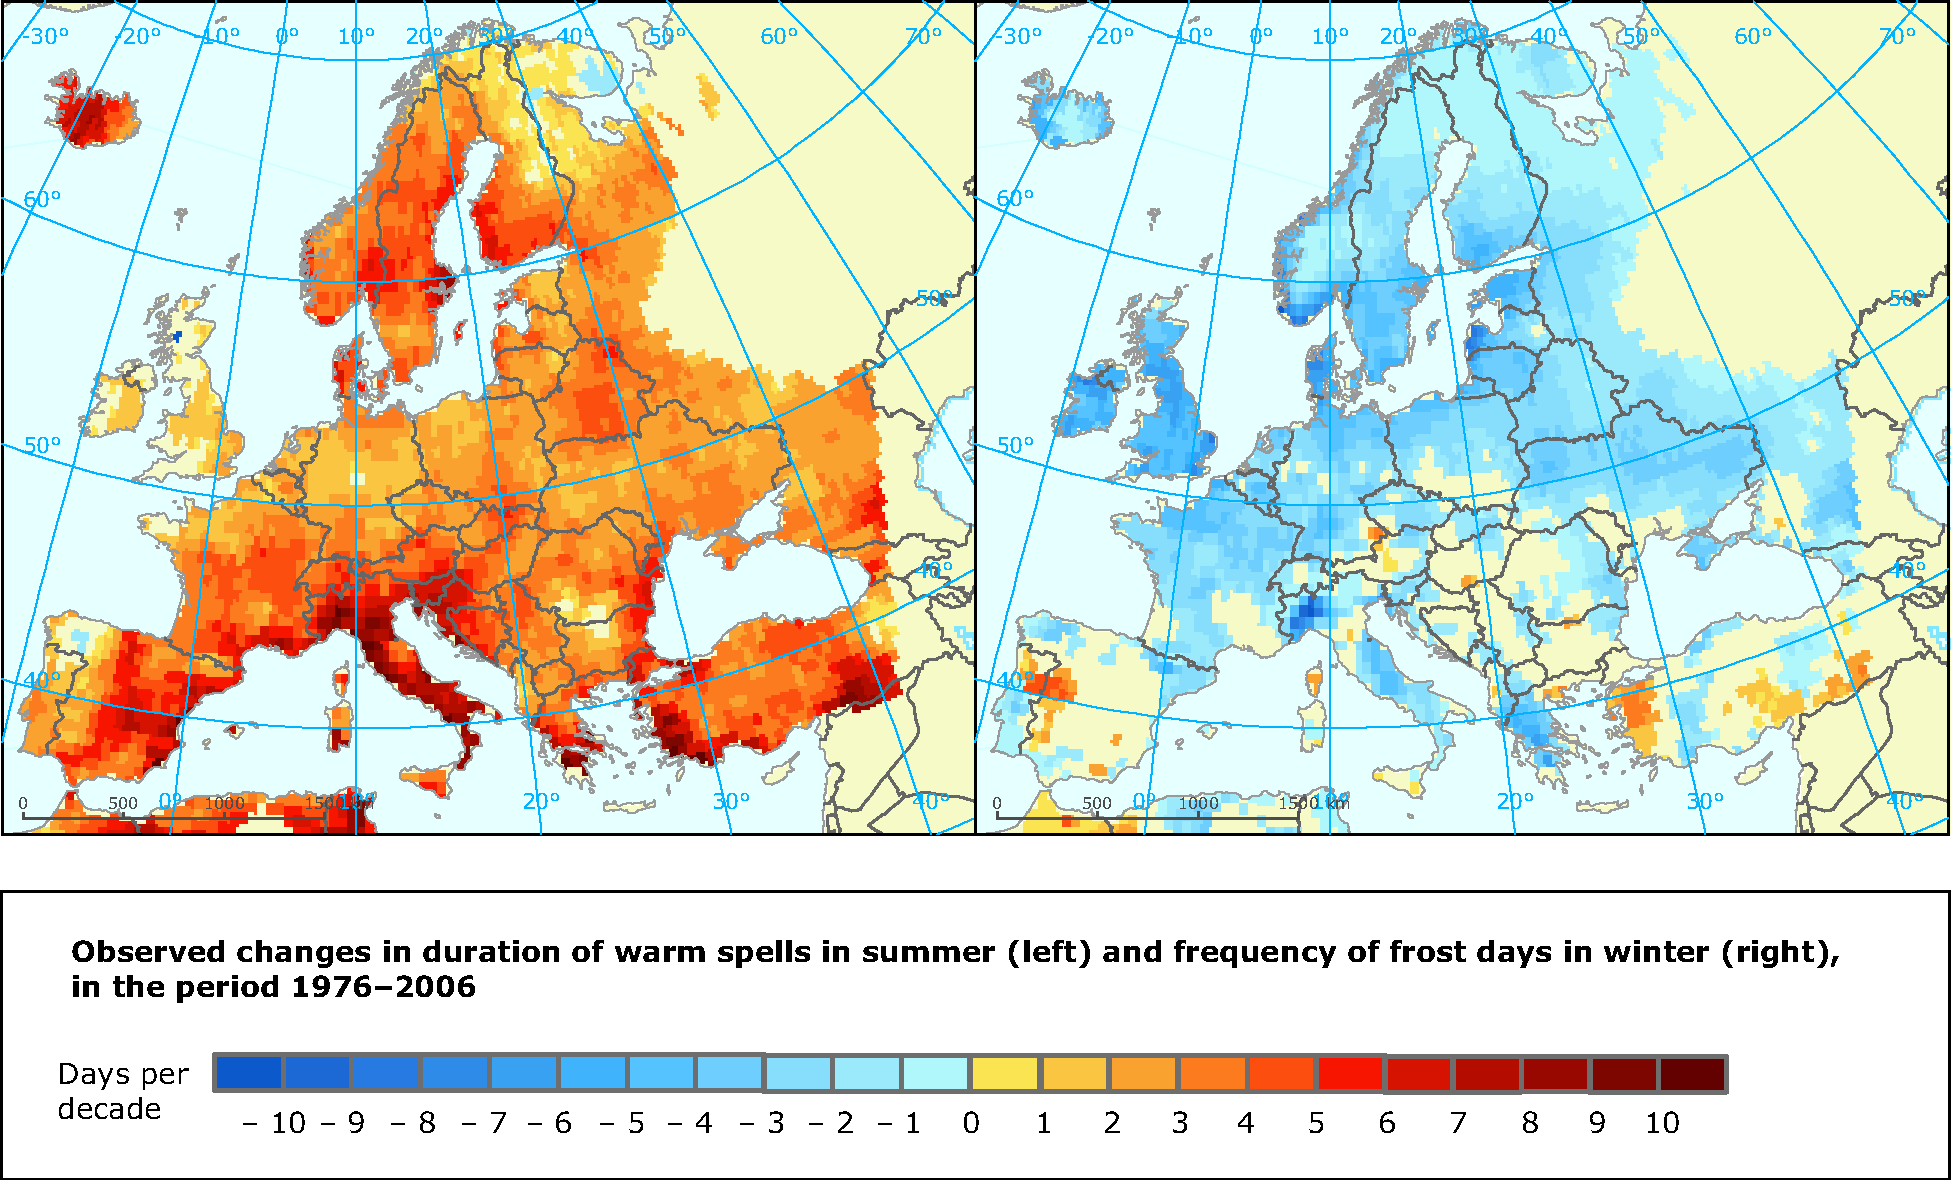 Observed changes in warm spells and frost days indices 1976-2006